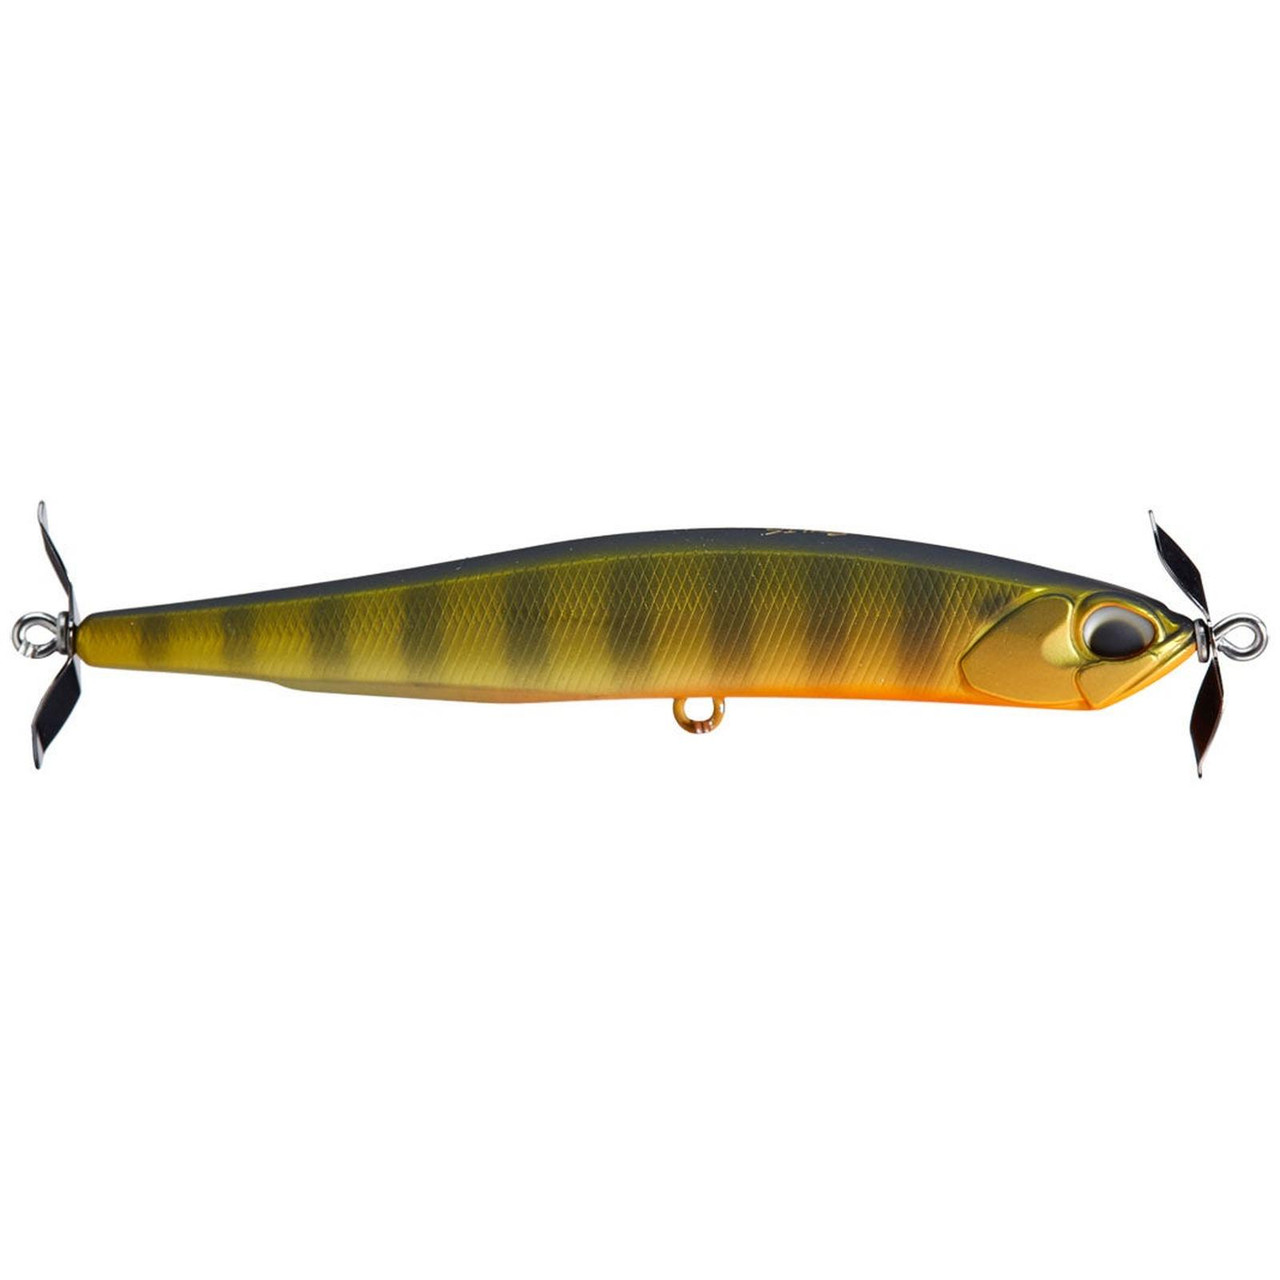 Duo Realis Spinbait 80 American Shad